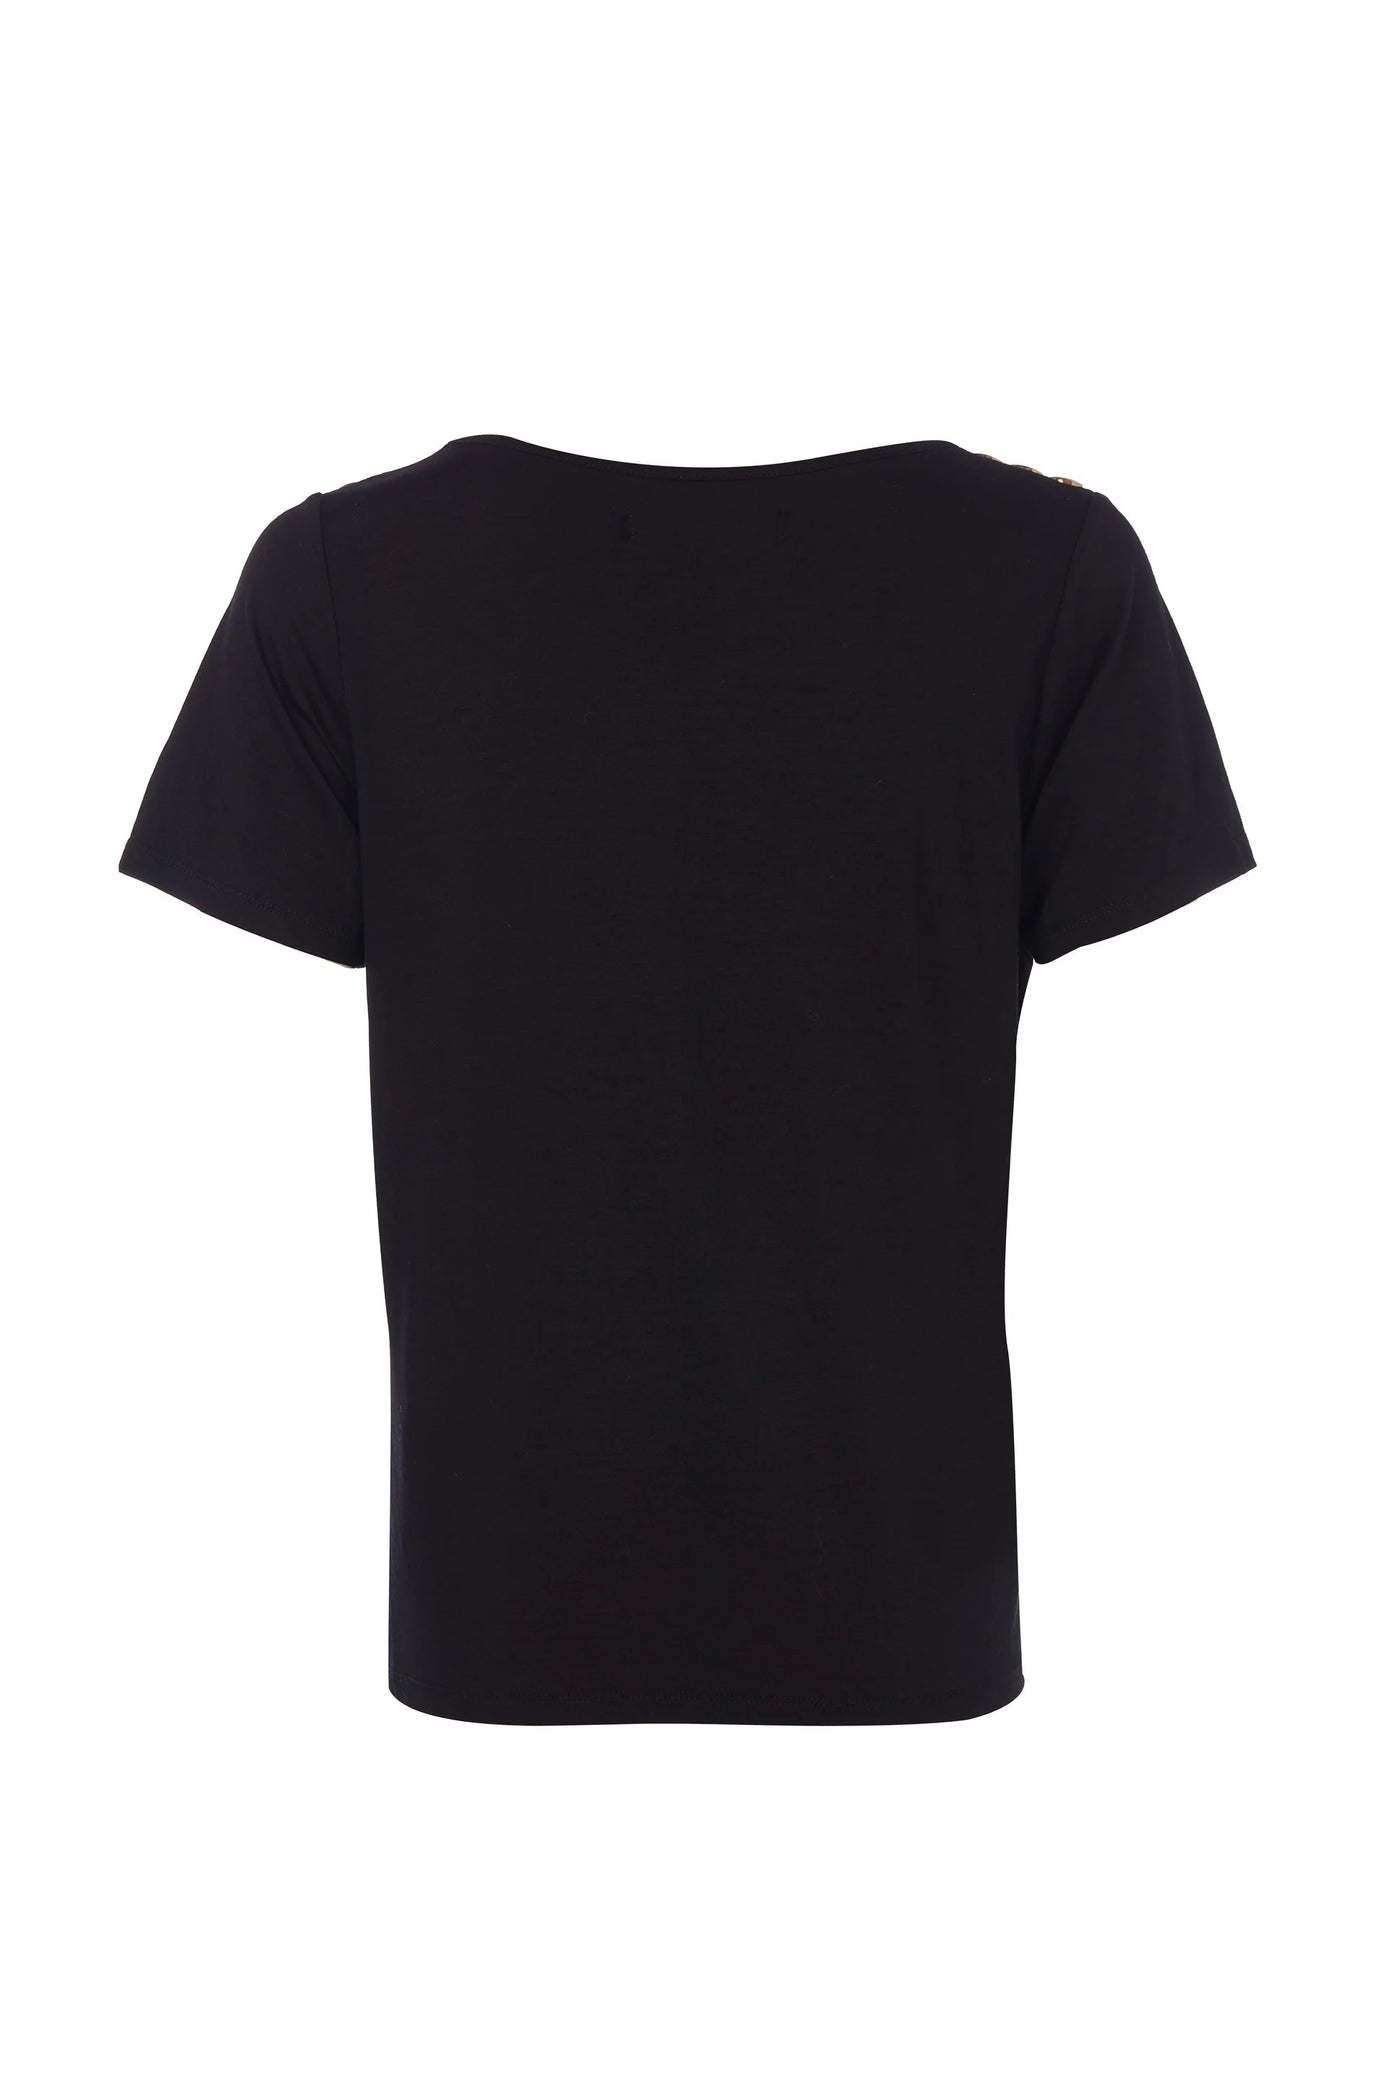 Holland Cooper Relax Fit V Neck Tee in Black Back